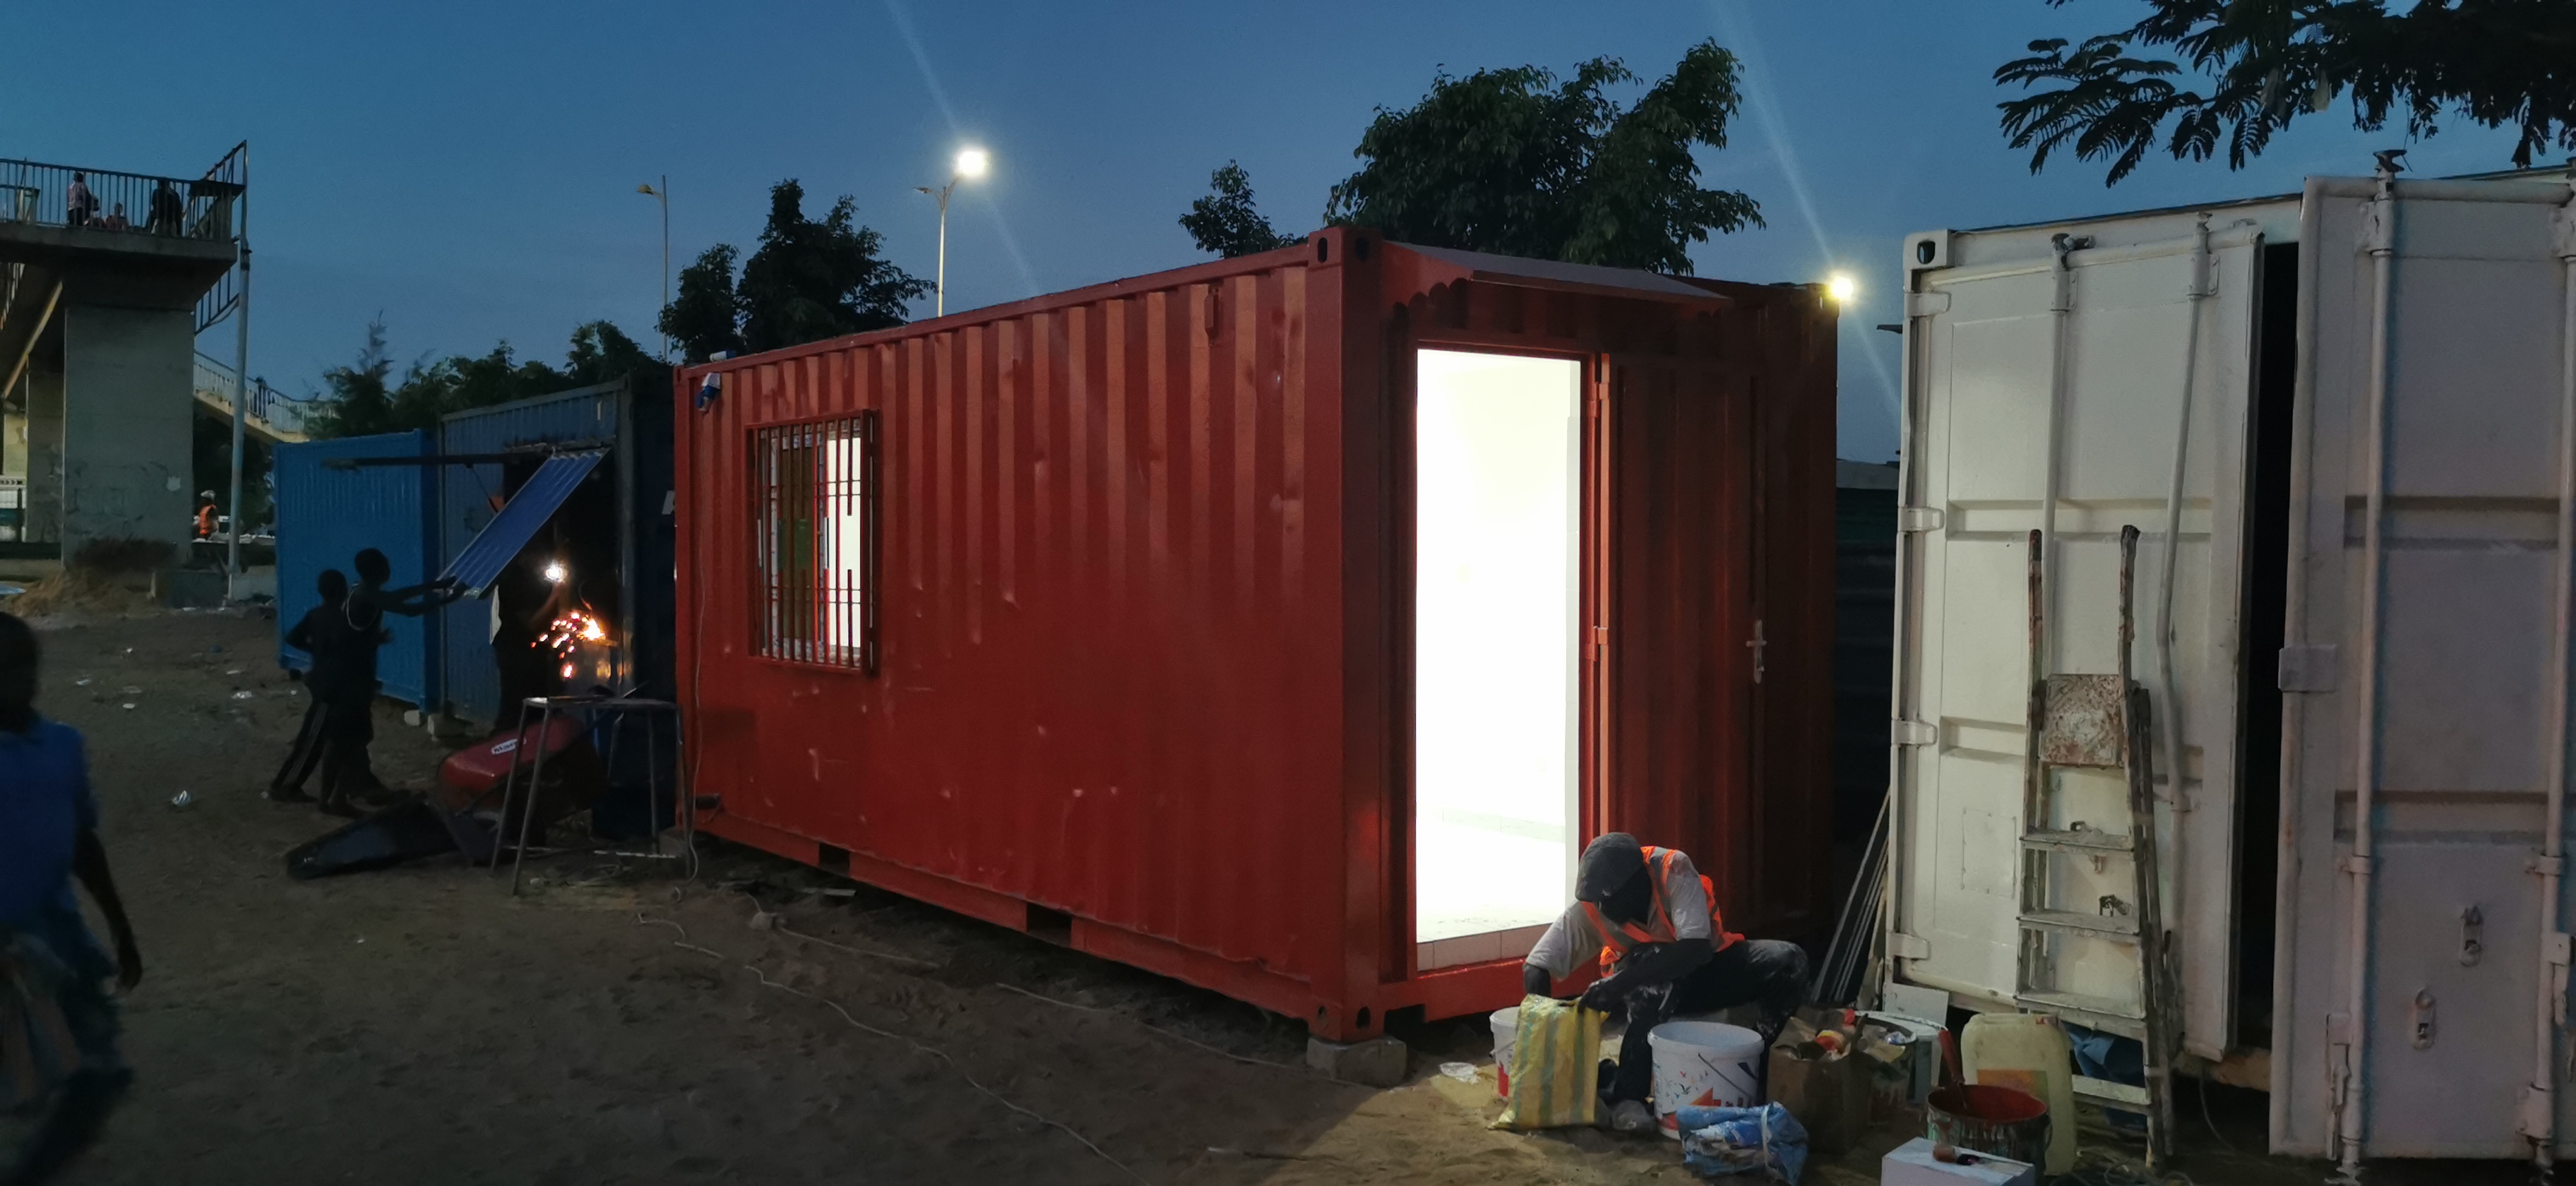 Customized Converted Containers in Senegal: Offices, Toilets, Shops